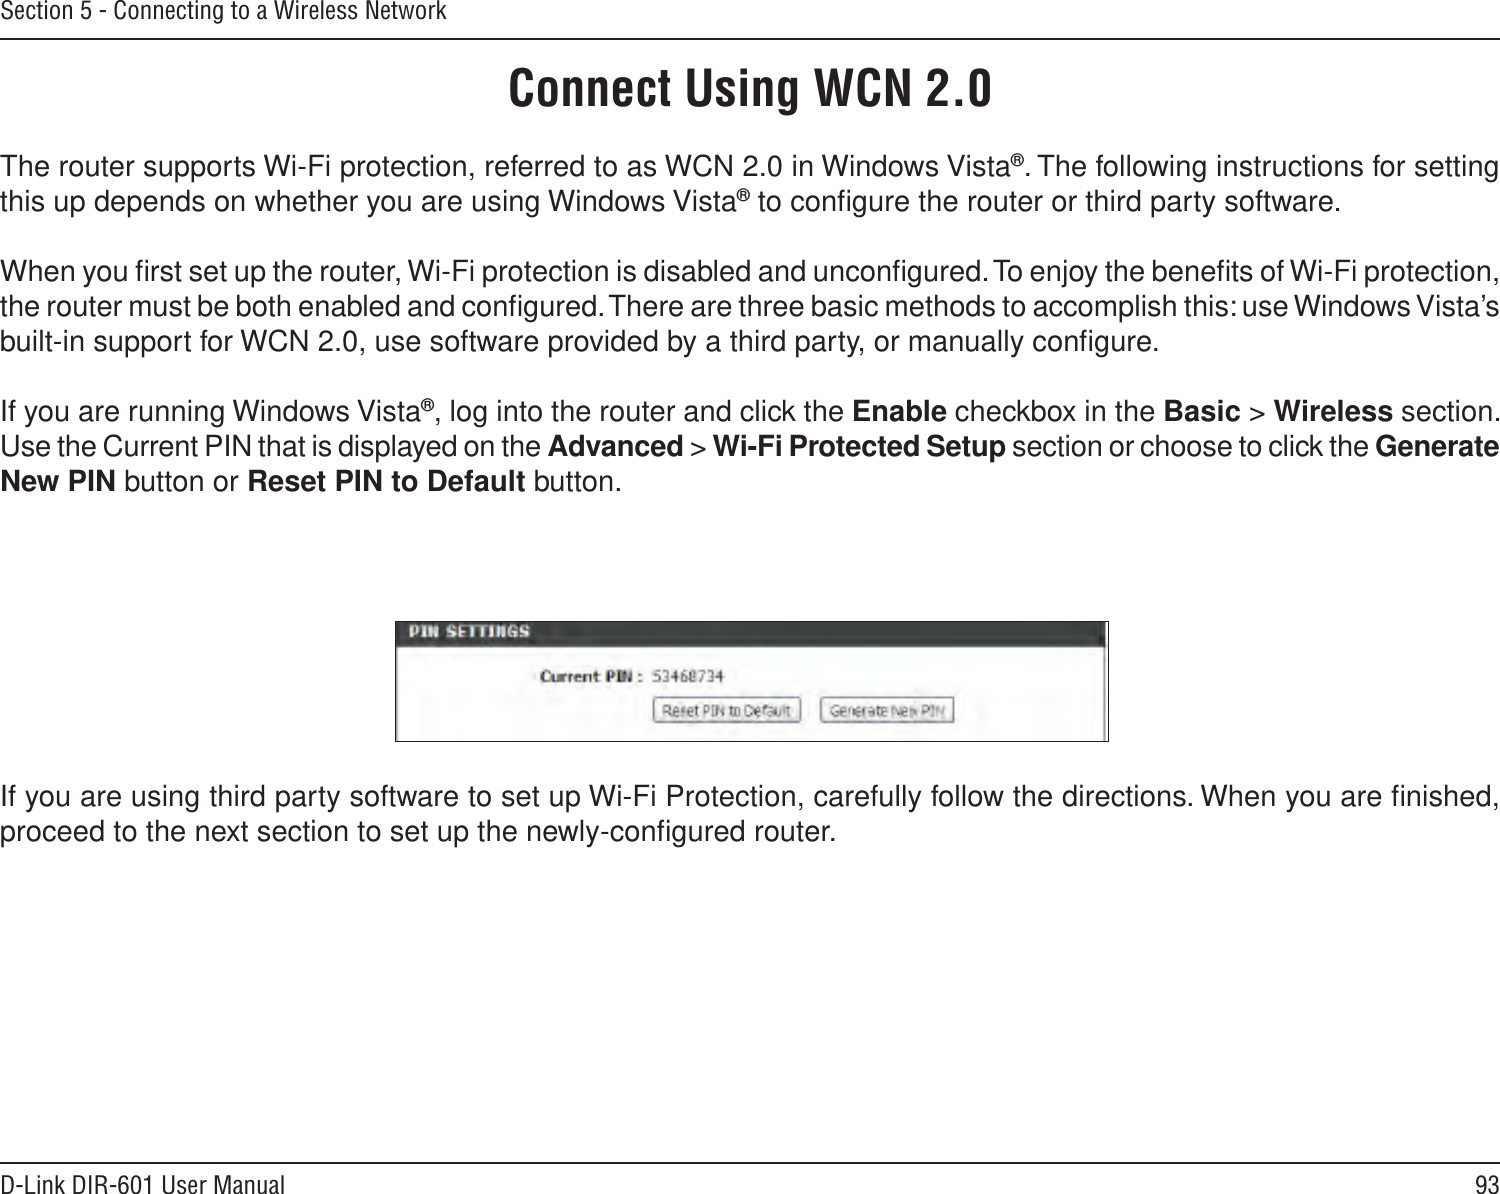 93D-Link DIR-601 User ManualSection 5 - Connecting to a Wireless NetworkConnect Using WCN 2.0The router supports Wi-Fi protection, referred to as WCN 2.0 in Windows Vista®. The following instructions for setting this up depends on whether you are using Windows Vista® to conﬁgure the router or third party software.        When you ﬁrst set up the router, Wi-Fi protection is disabled and unconﬁgured. To enjoy the beneﬁts of Wi-Fi protection, the router must be both enabled and conﬁgured. There are three basic methods to accomplish this: use Windows Vista’s built-in support for WCN 2.0, use software provided by a third party, or manually conﬁgure. If you are running Windows Vista®, log into the router and click the Enable checkbox in the Basic &gt; Wireless section. Use the Current PIN that is displayed on the Advanced &gt; Wi-Fi Protected Setup section or choose to click the Generate New PIN button or Reset PIN to Default button. If you are using third party software to set up Wi-Fi Protection, carefully follow the directions. When you are ﬁnished, proceed to the next section to set up the newly-conﬁgured router. 